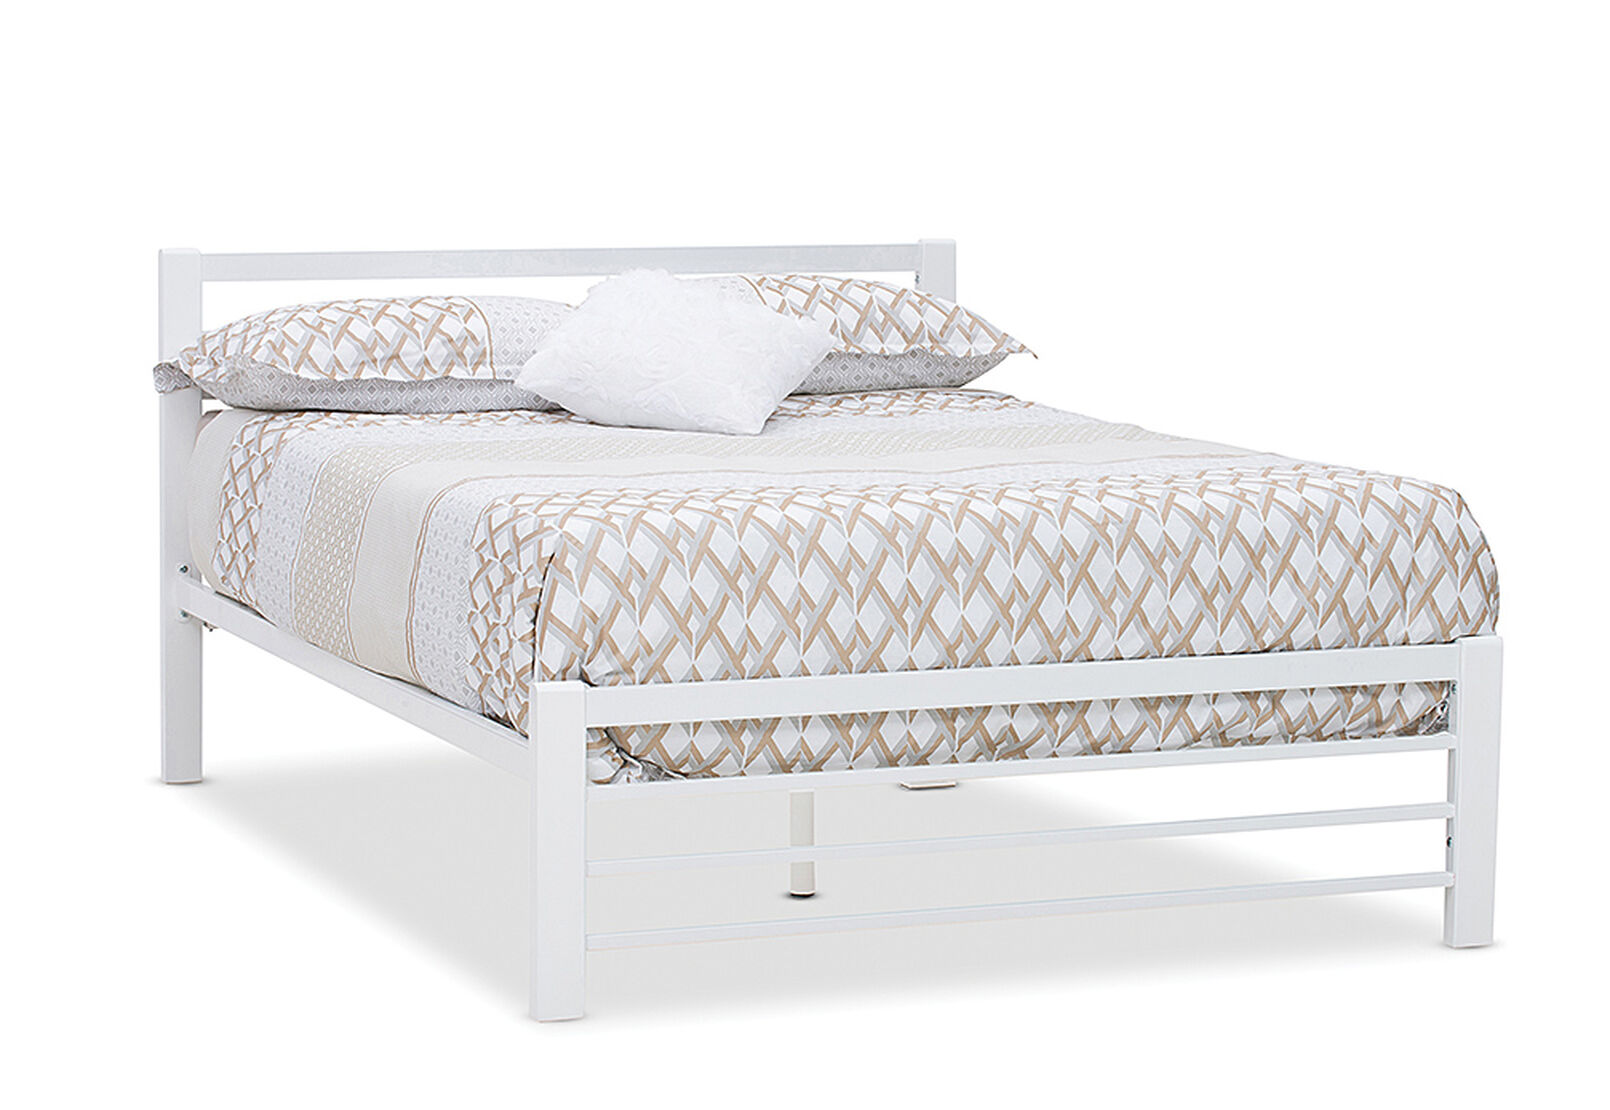 Orient Double Bed Amart Furniture